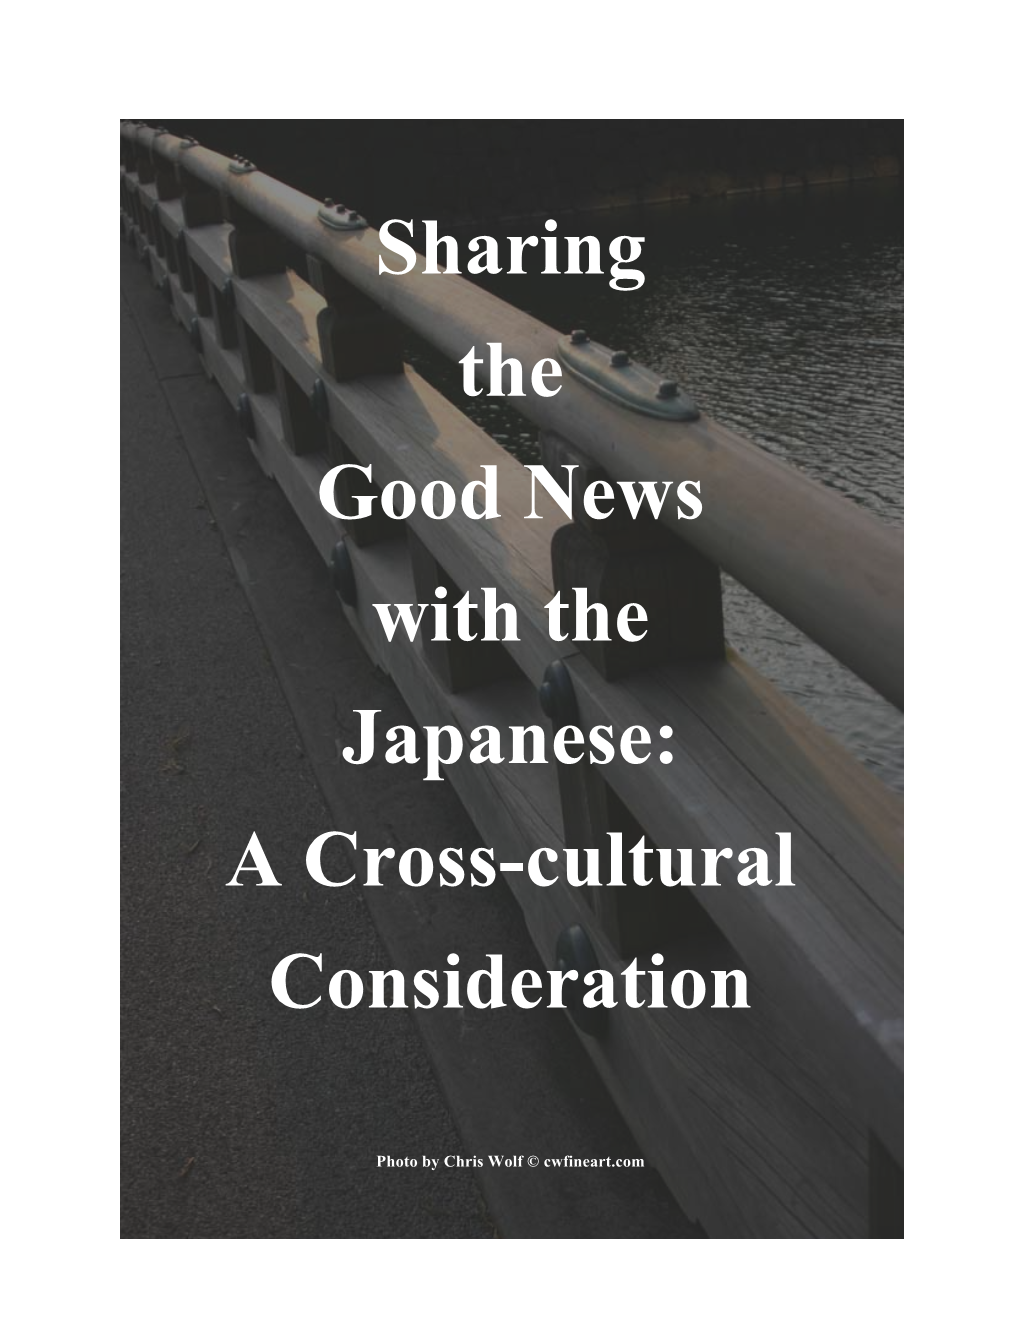 Sharing the Good News with the Japanese: a Cross-Cultural Consideration